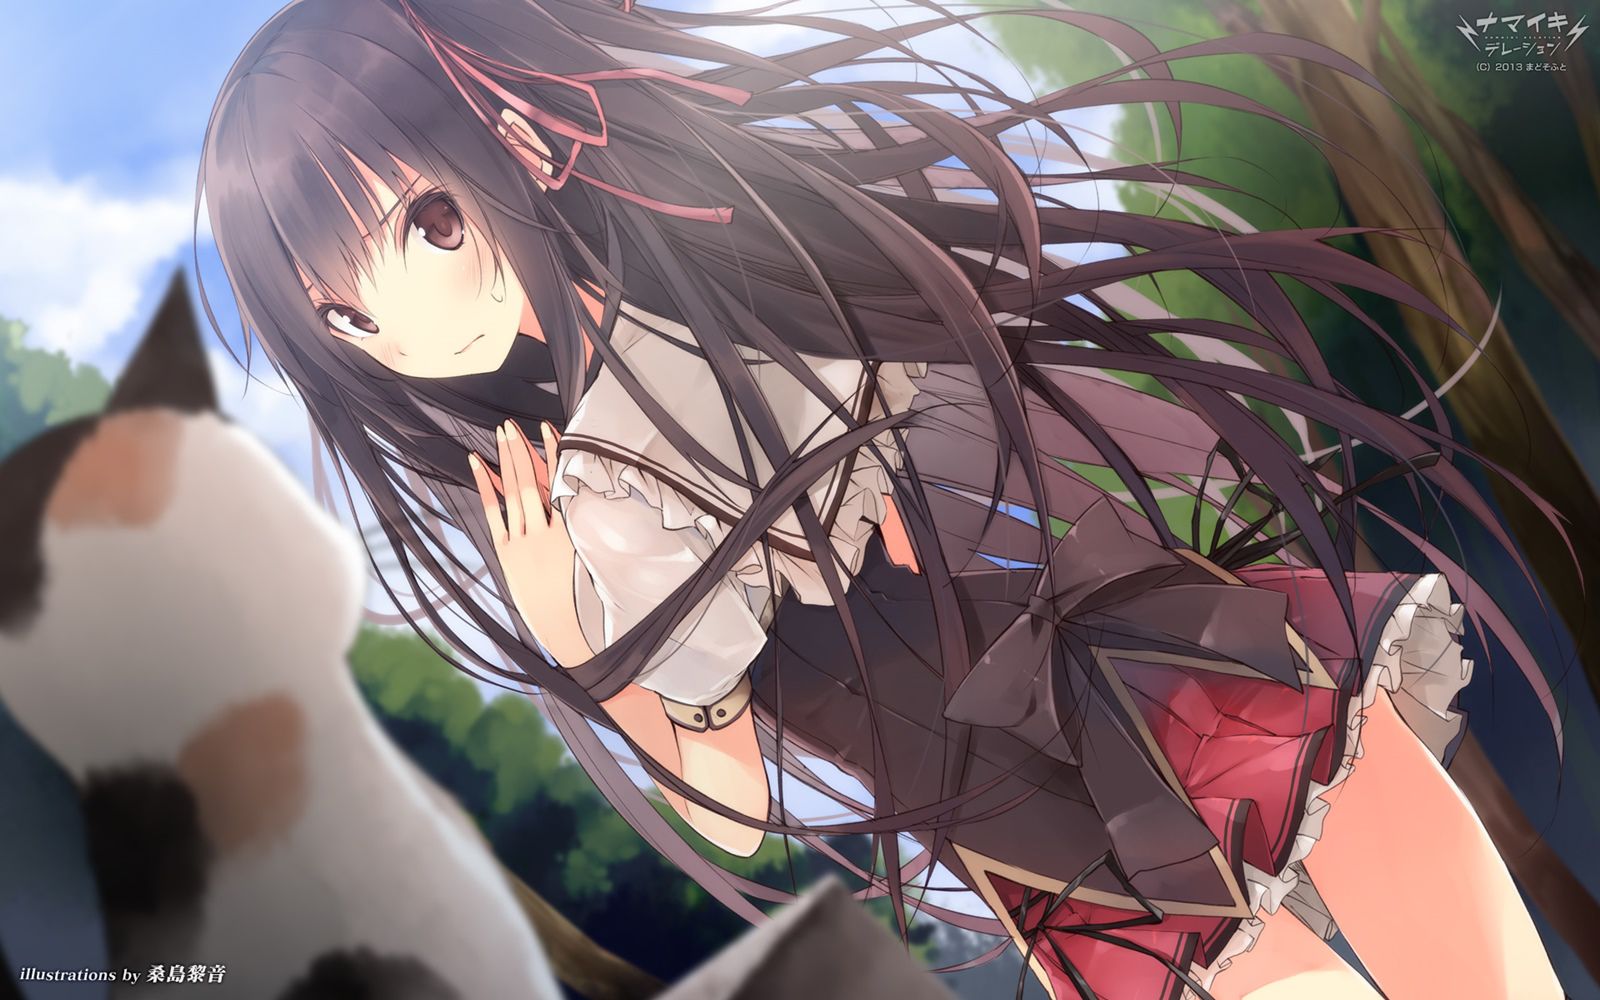 Namickideration [under age 18 prohibited eroge CG] wallpapers, images 6